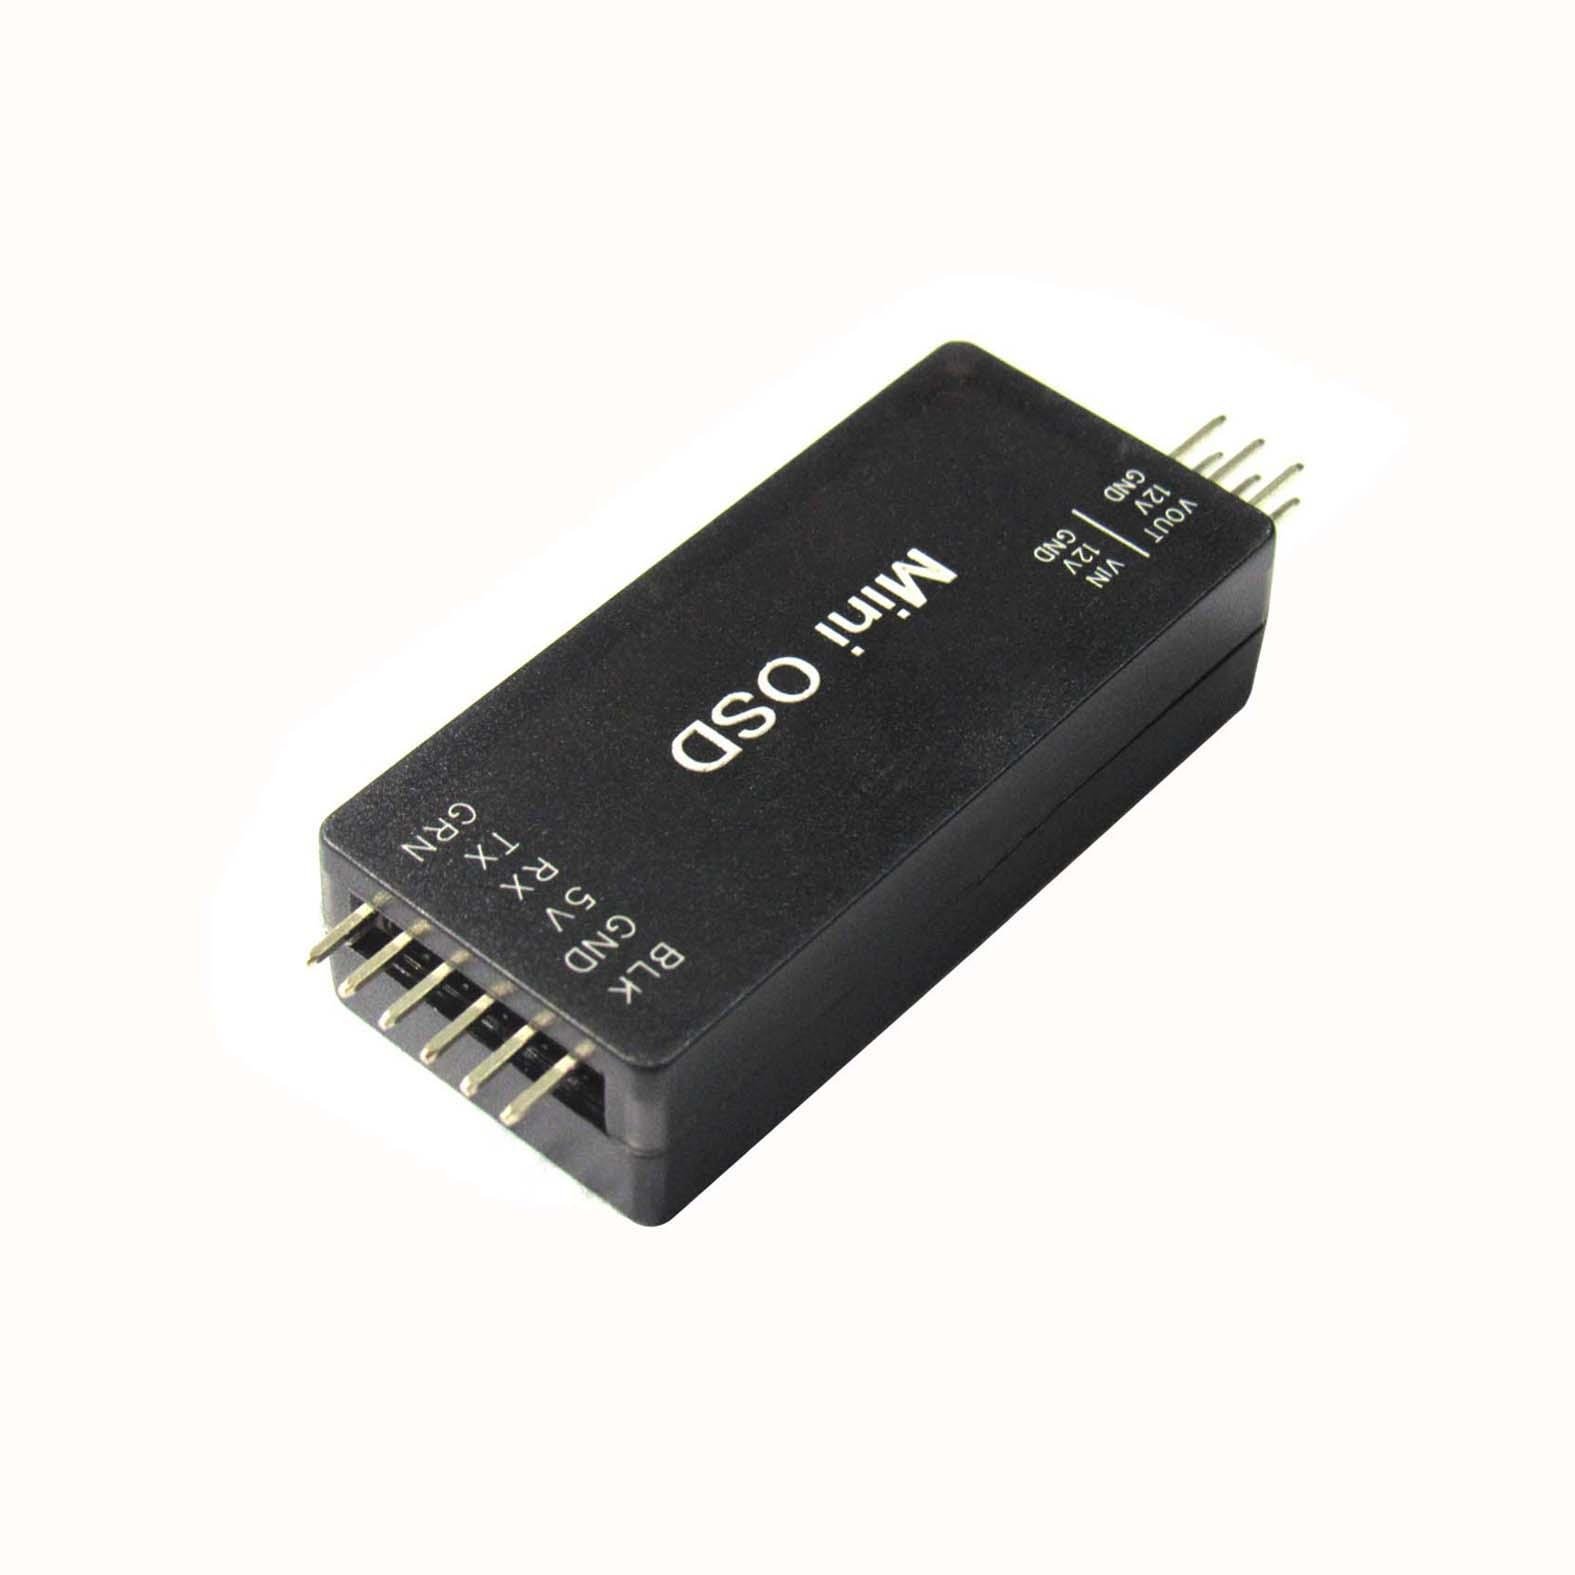 Share Goo Mini OSD Module On Screen Display Video Record for RC APM APM2.8 Pixhawk PX4 Flight Controller Airplanes with Battery Strap